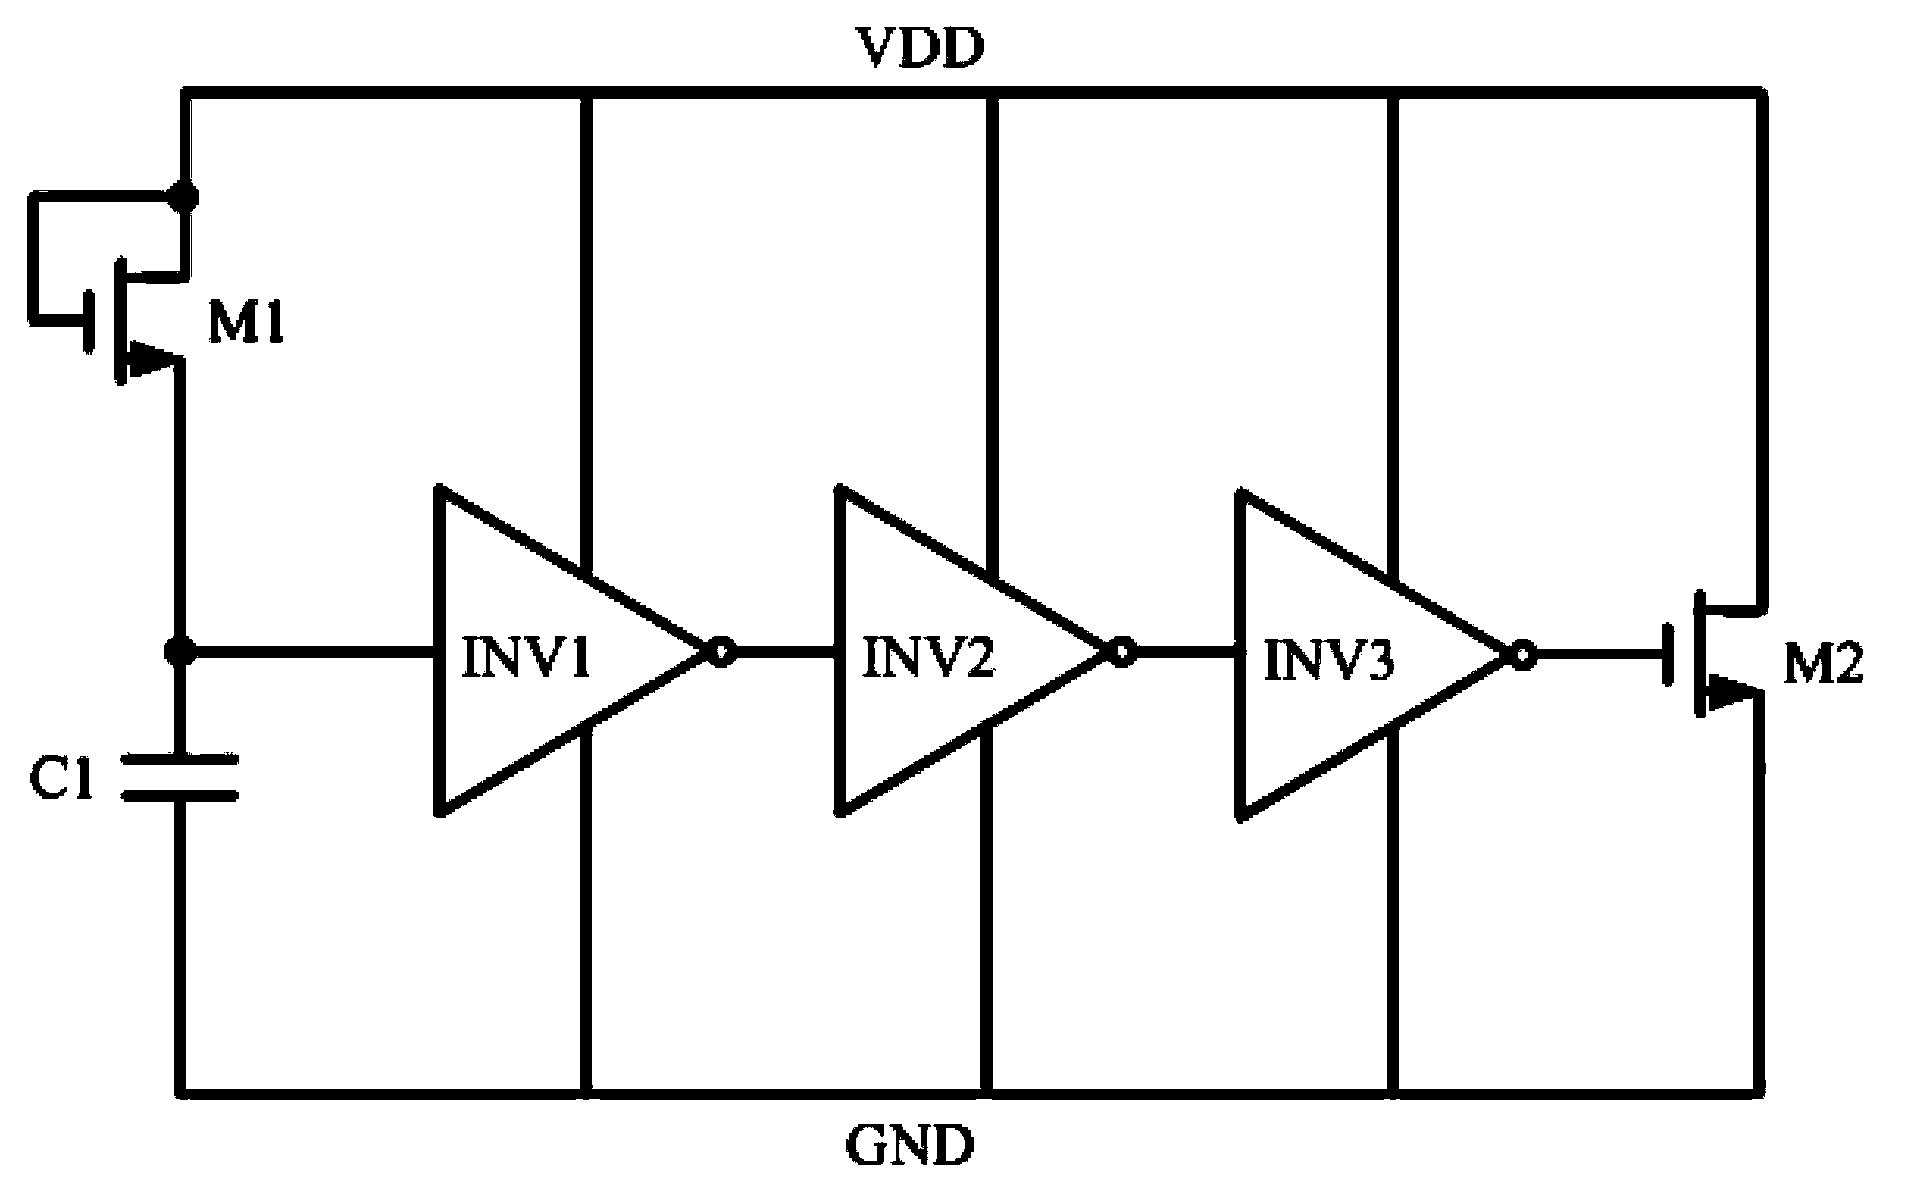 Power-supply clamp ESD circuit